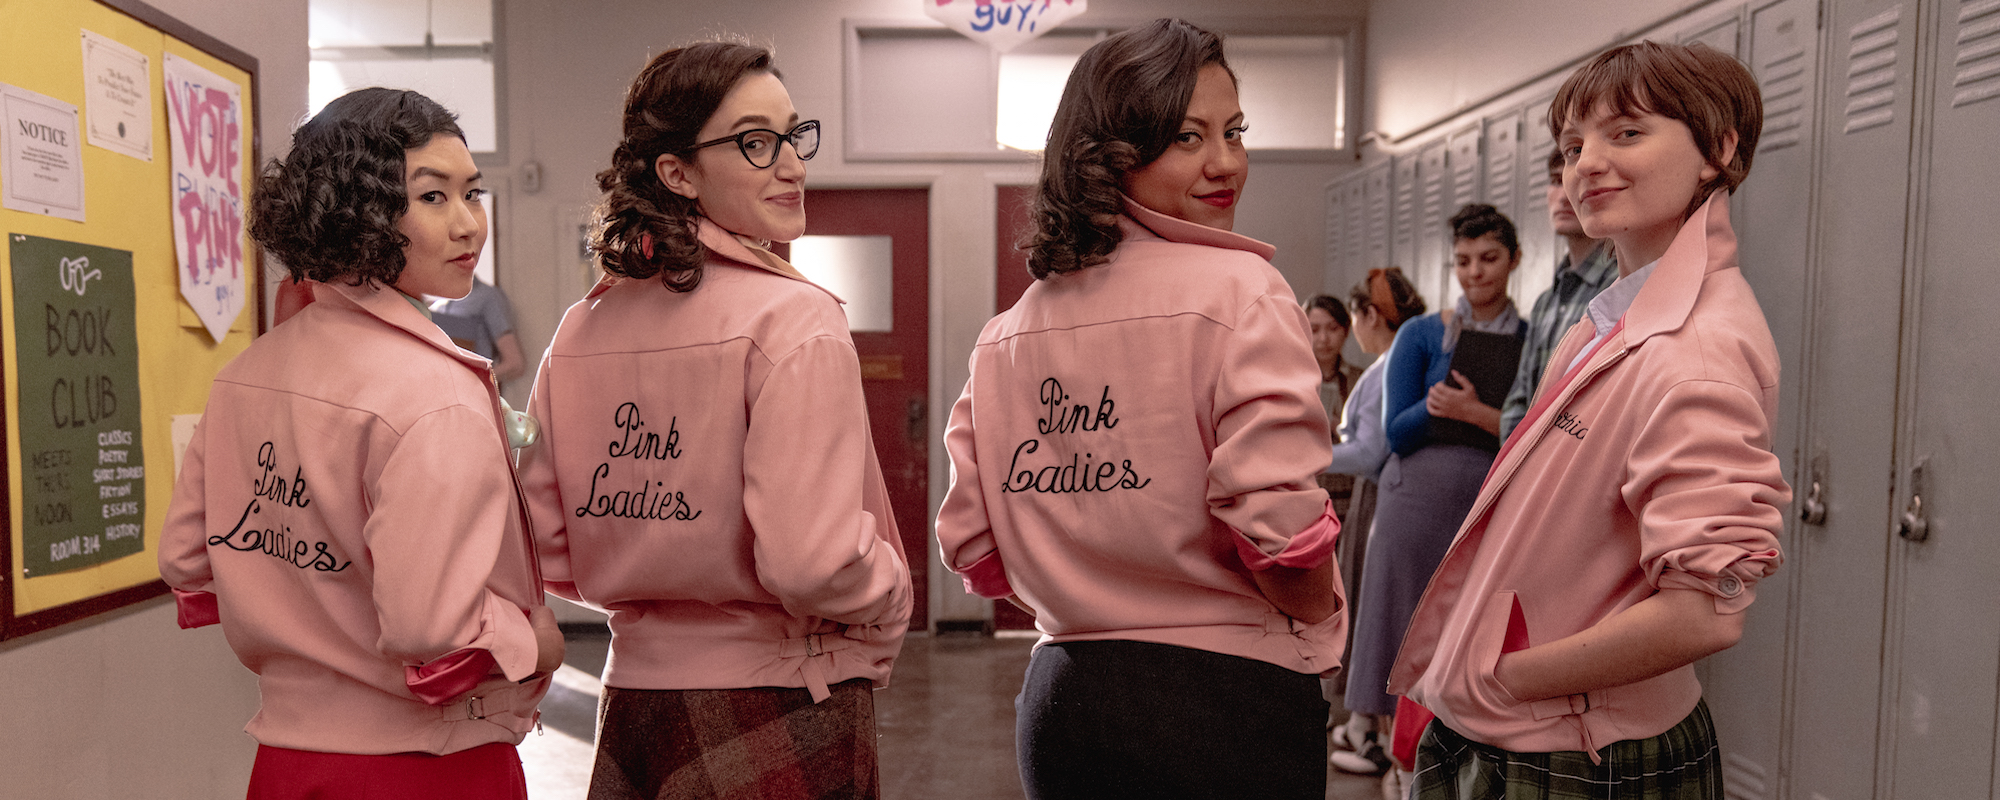 New ‘Grease’ Series Tells the Story Behind the Pink Ladies with Original Music by Justin Tranter